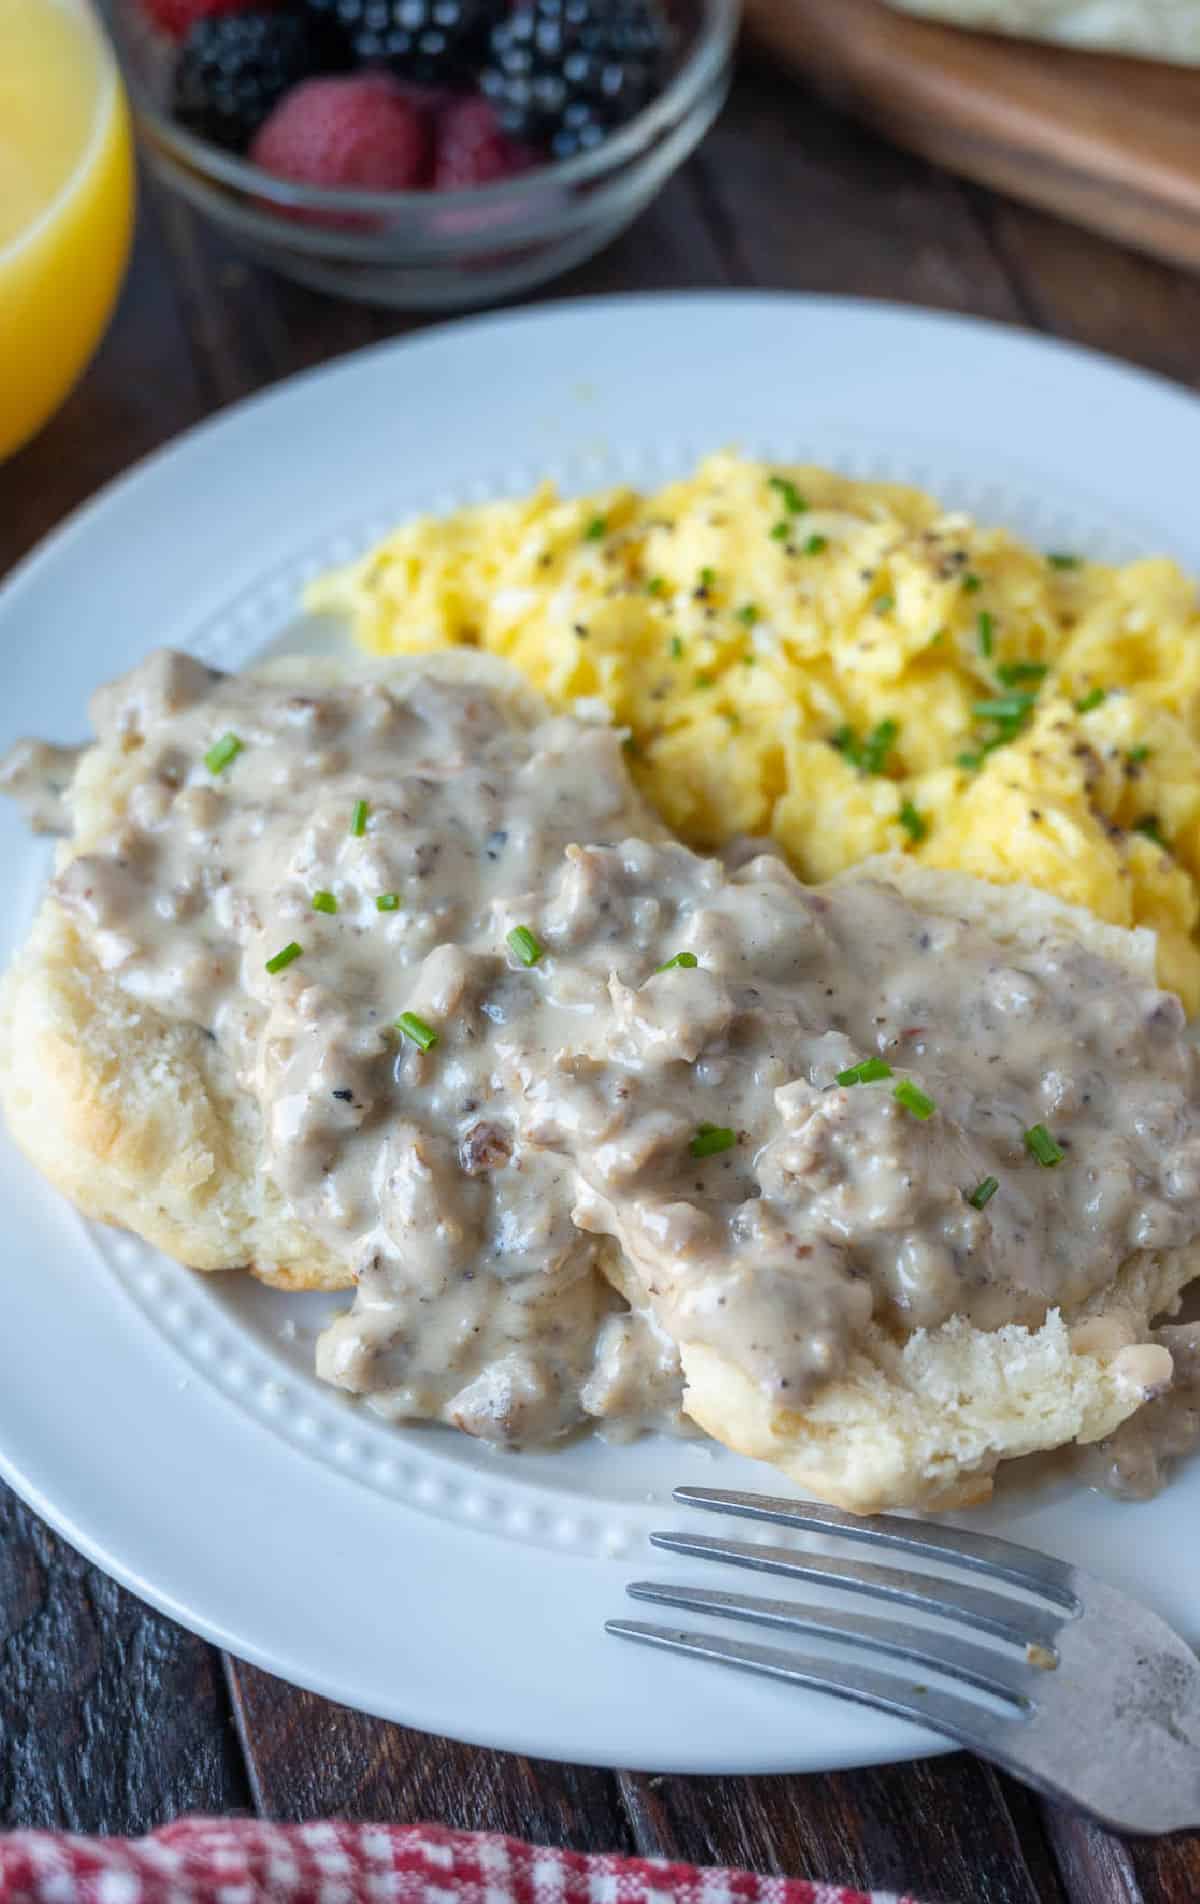 Sausage gravy on top of a biscuit with a side of scrambled eggs.